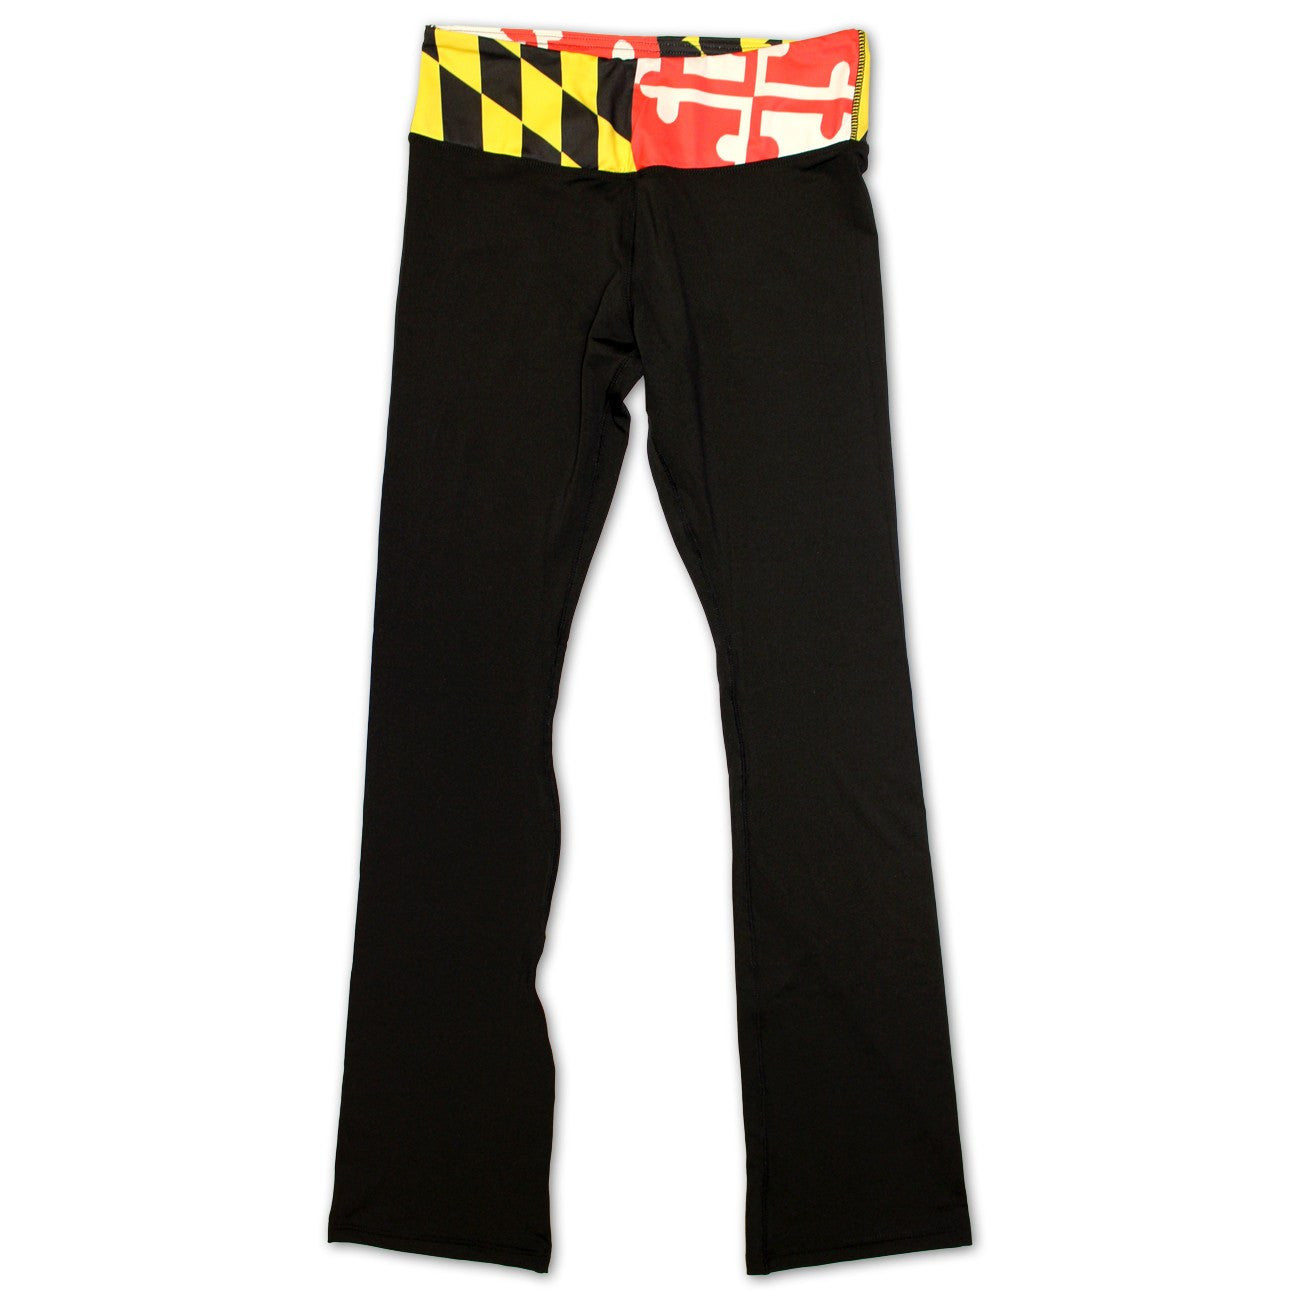 Maryland Flag / Yoga Pants - Route One Apparel